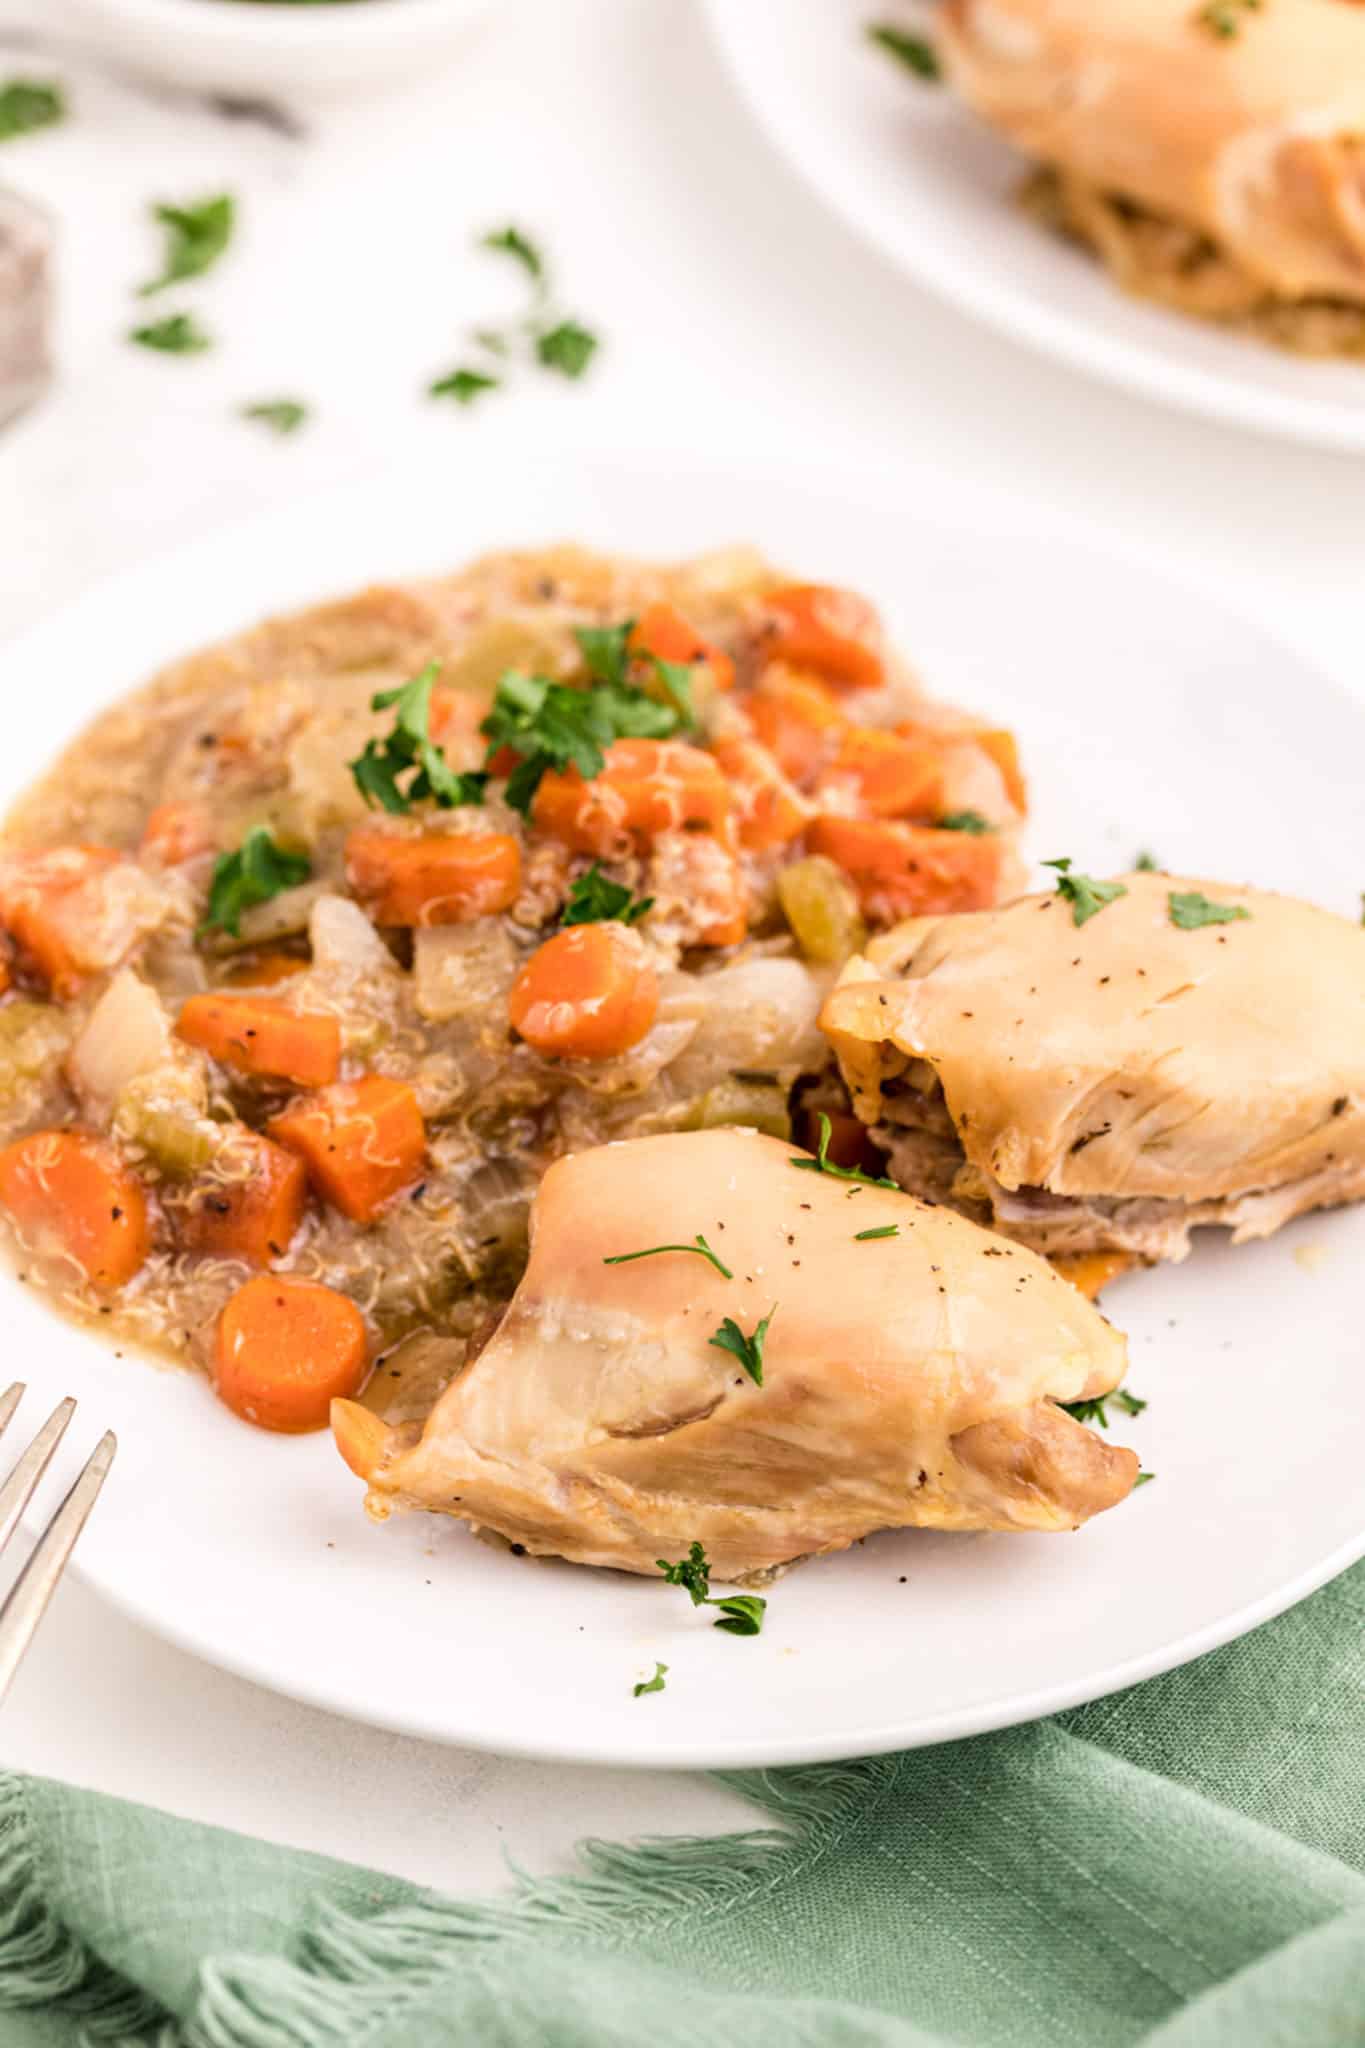 slow cooker chicken, carrots, and quinoa served on a plate.